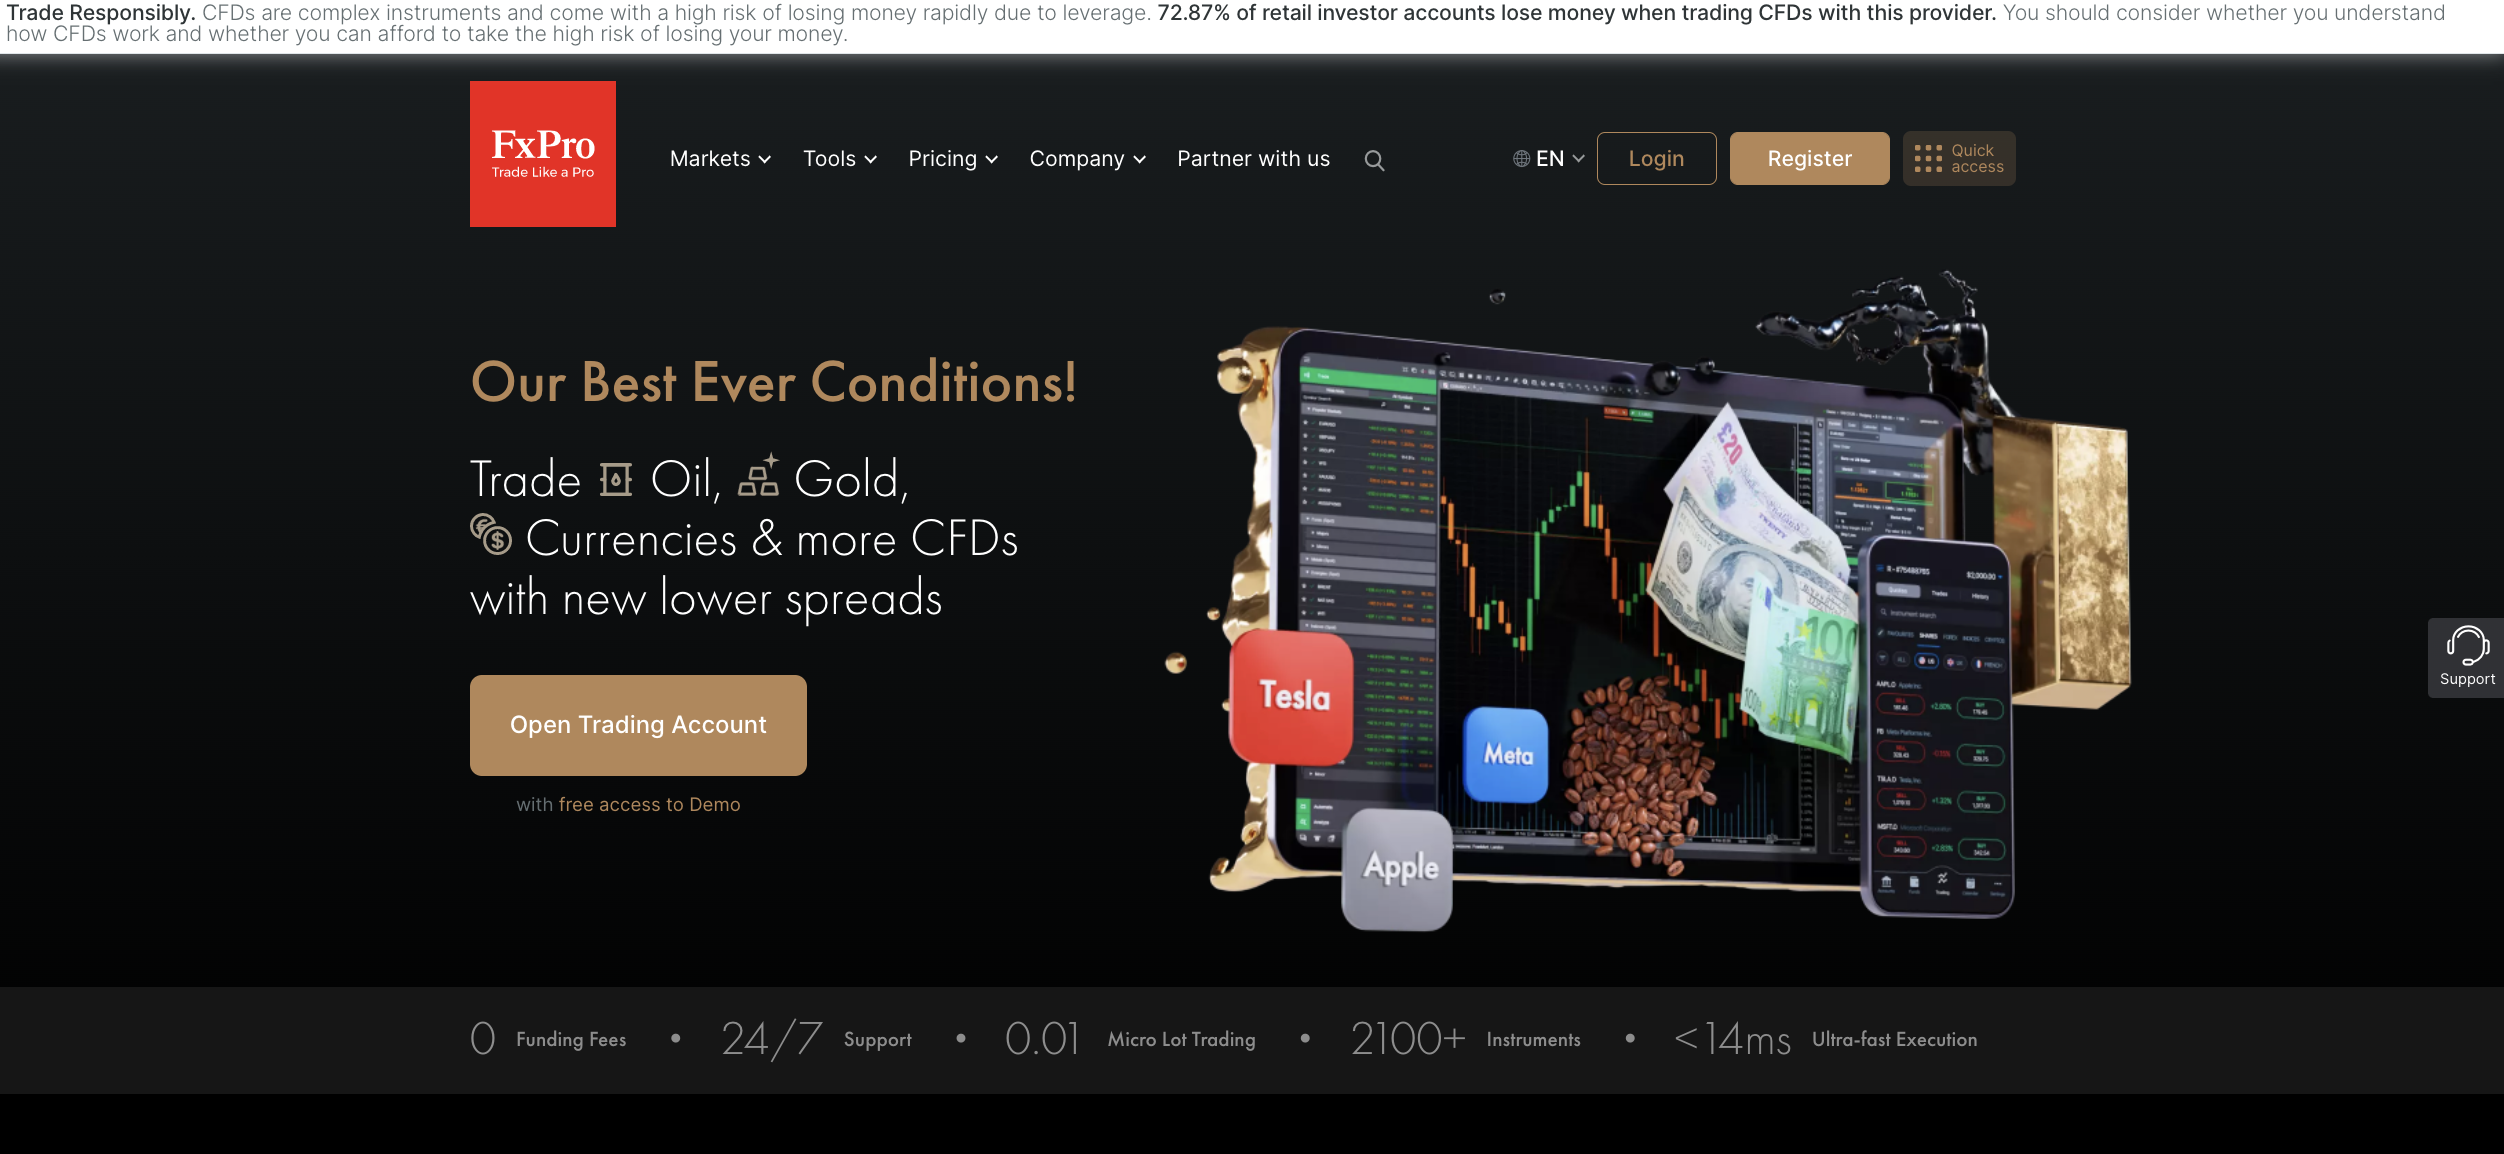 The official website of the forex broker FxPro